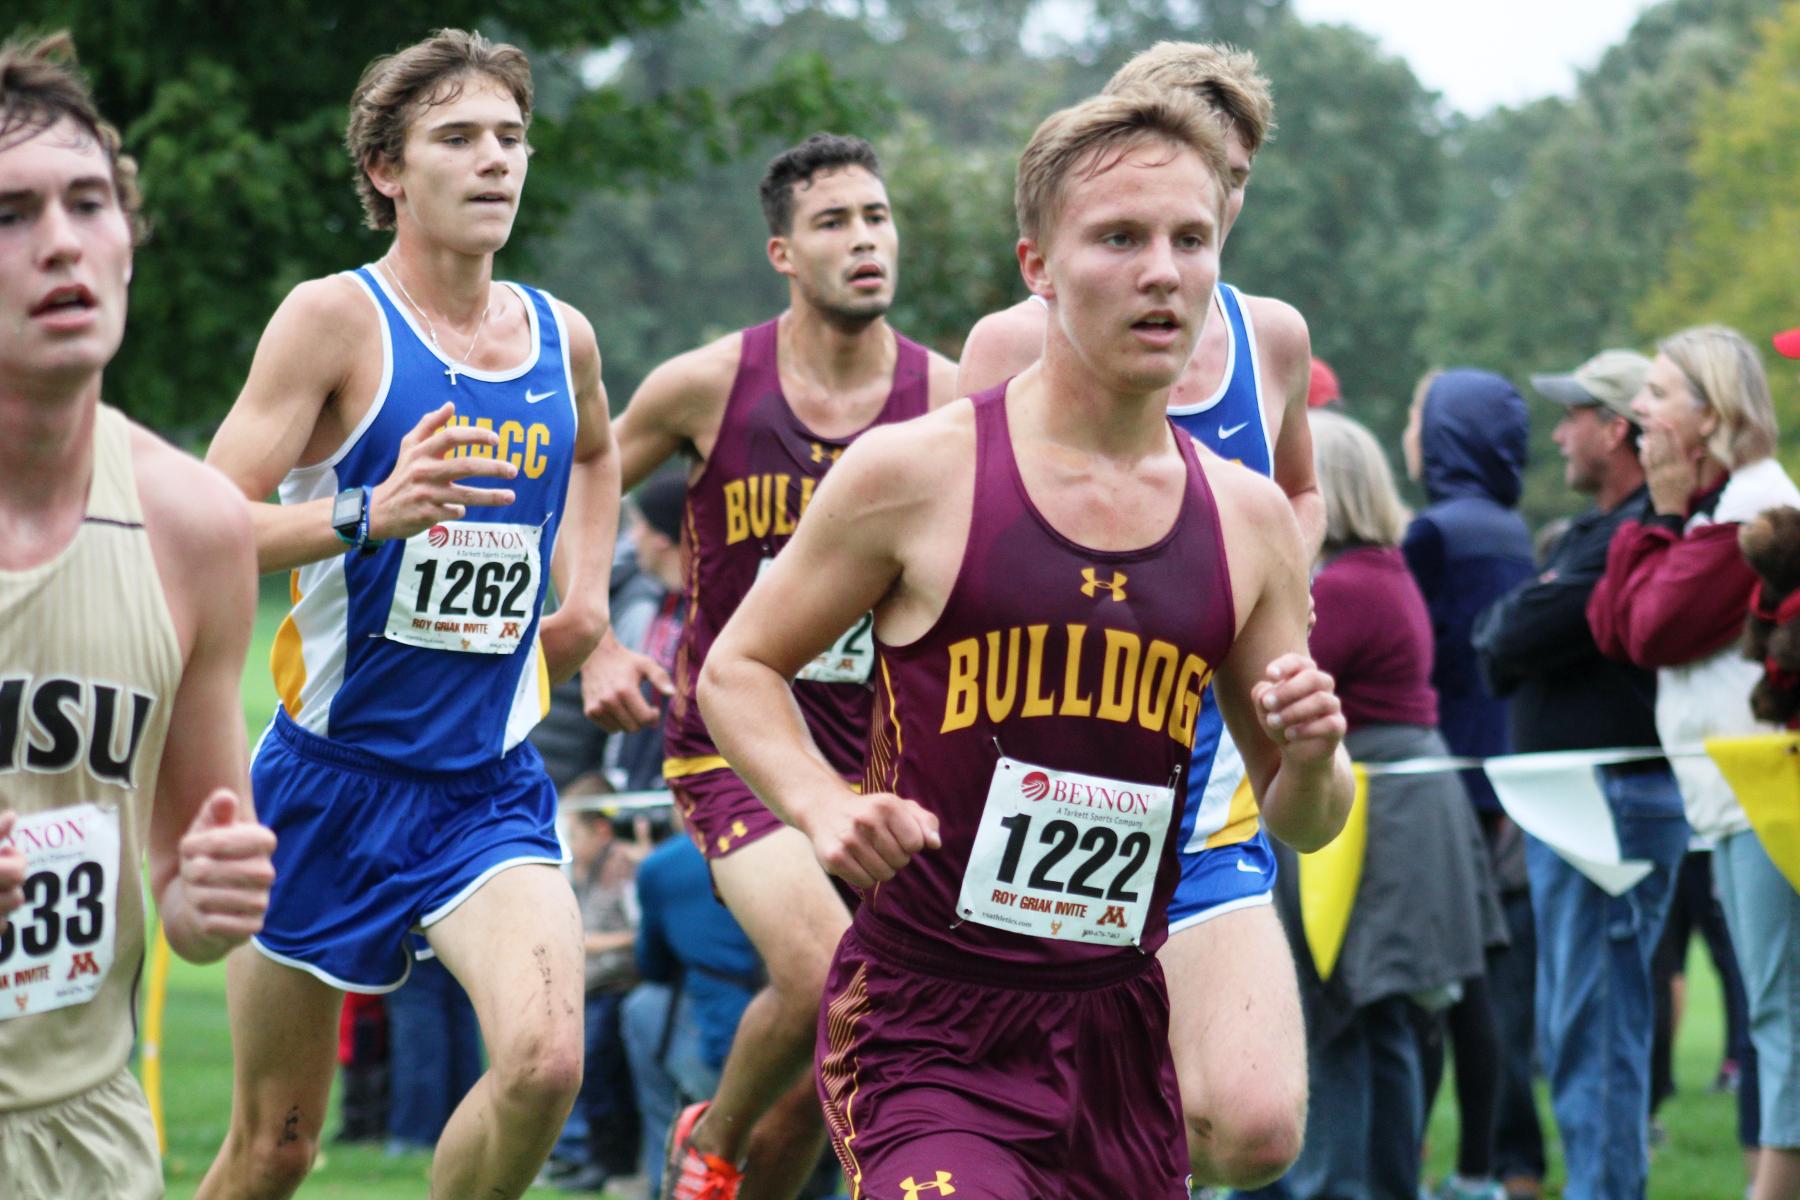 NIACC men's cross country team ranked No. 9 in latest poll